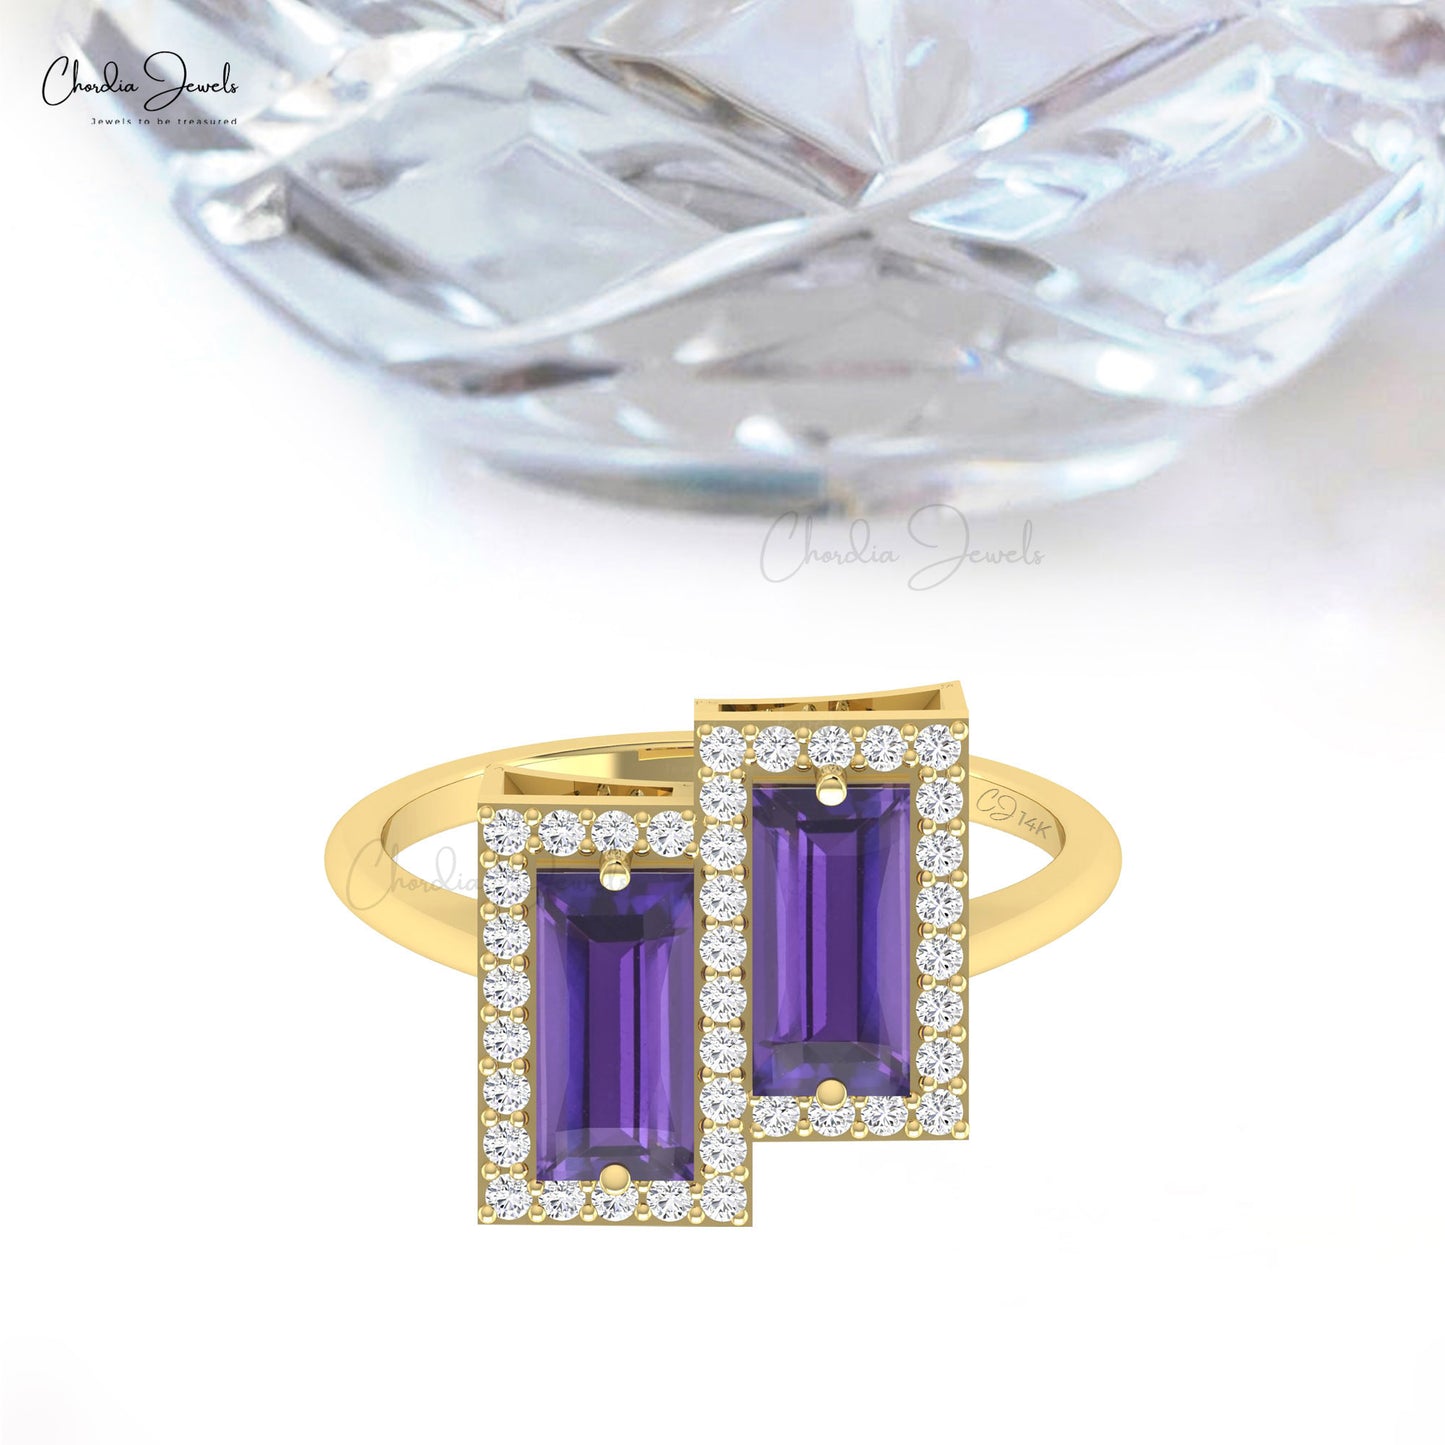 Double Halo Amethyst Baguette Ring Hallmarked 14K Real Gold Diamond Accents Birthstone Ring